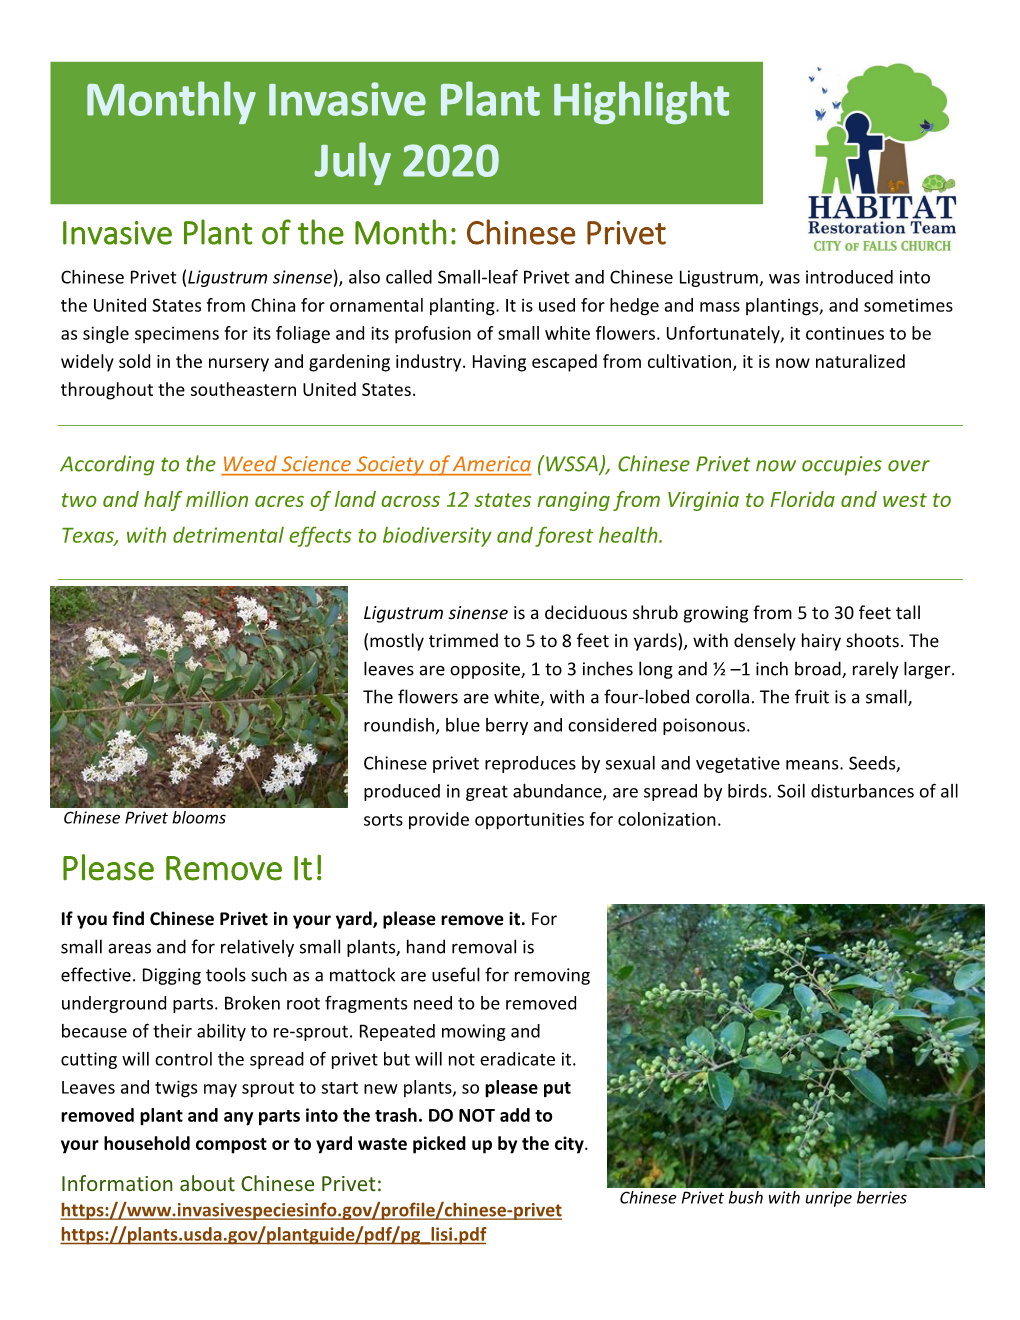 Monthly Invasive Plant Highlight July 2020